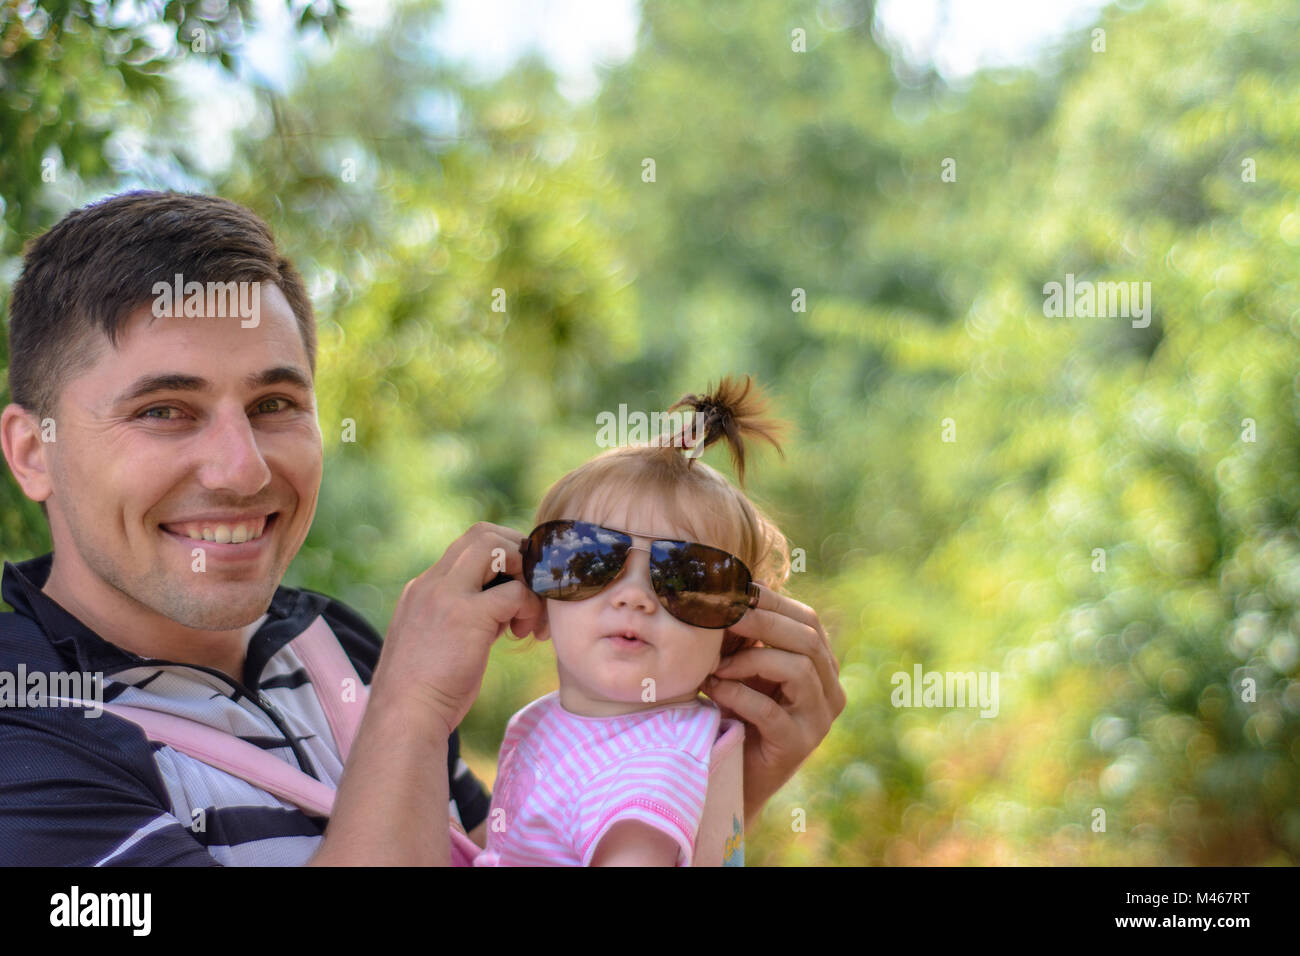 Amazing little girl is playing with sunglasses with her father Stock Photo